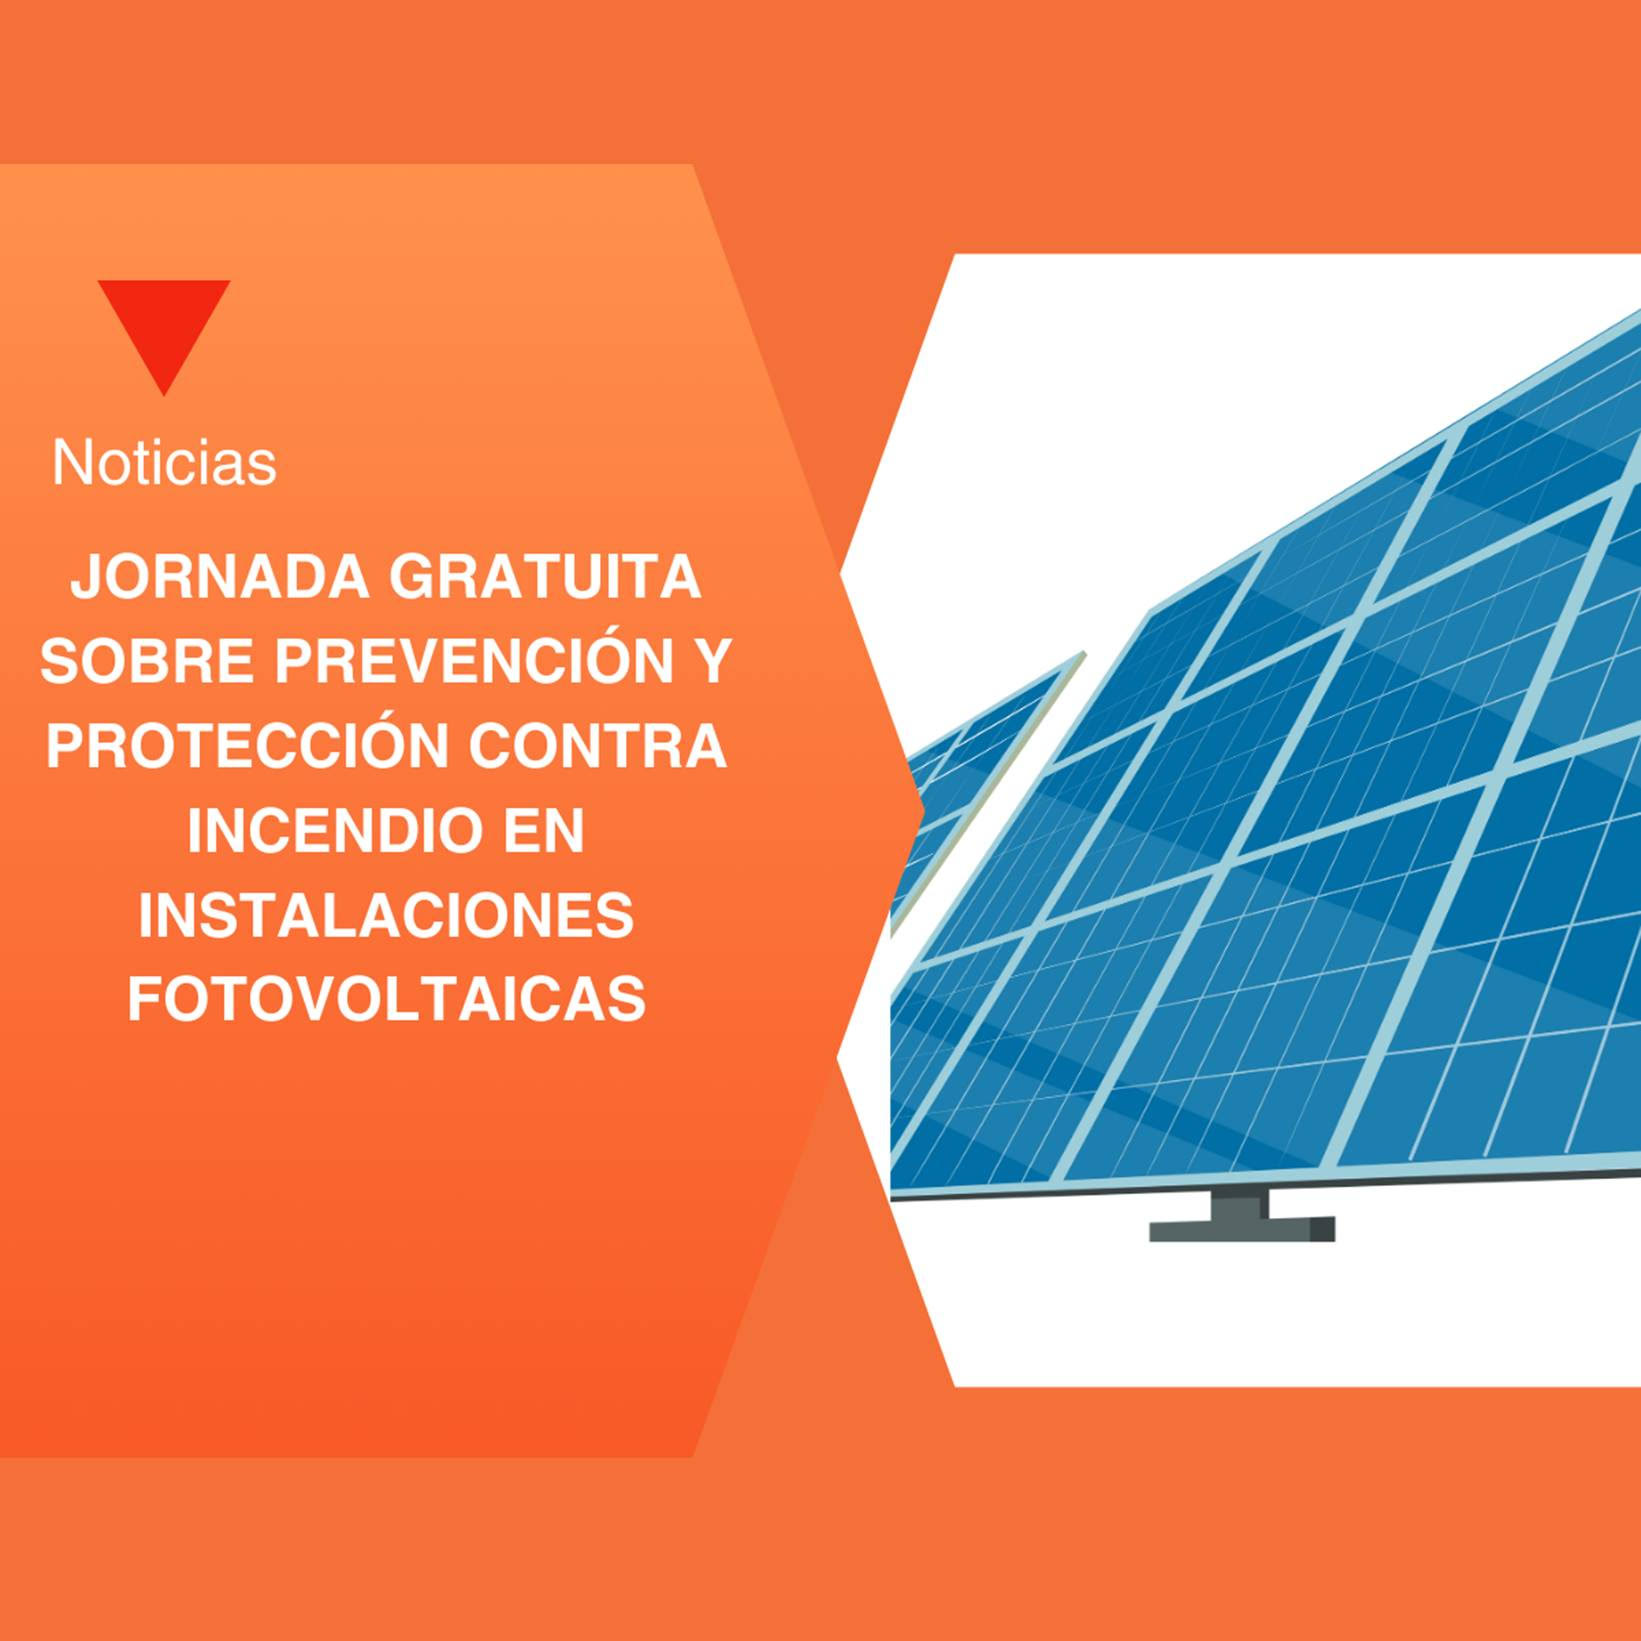 SEMINAR ON FIRE PREVENTION AND PROTECTION IN PHOTOVOLTAIC INSTALLATIONS